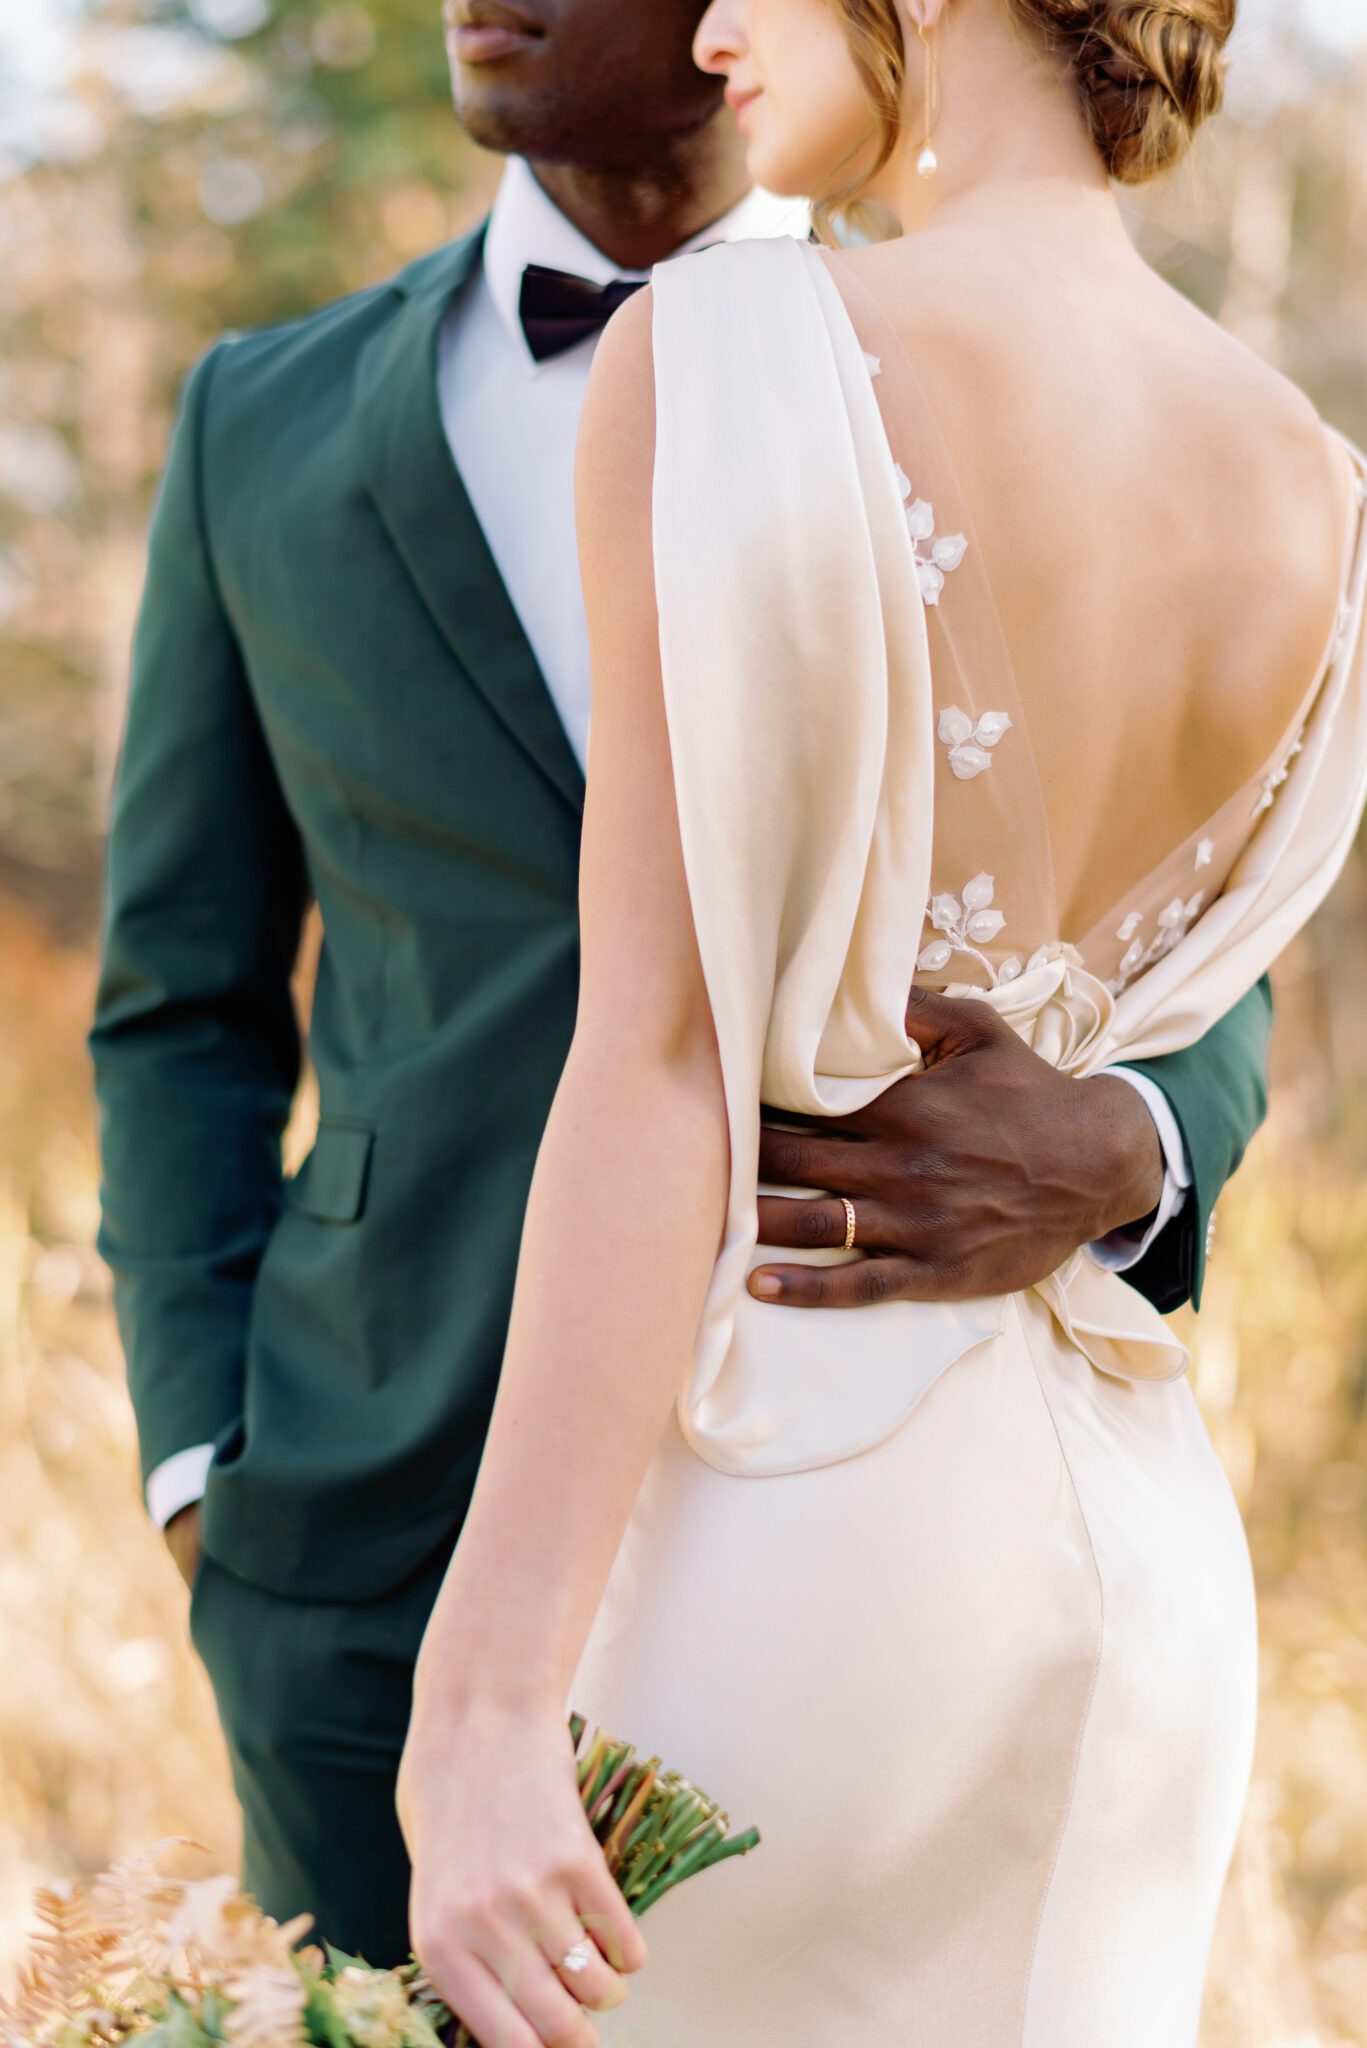 Couple embracing at intimate Fall wedding, groom wearing emerald green suit, and bride in elegant satin gown. 